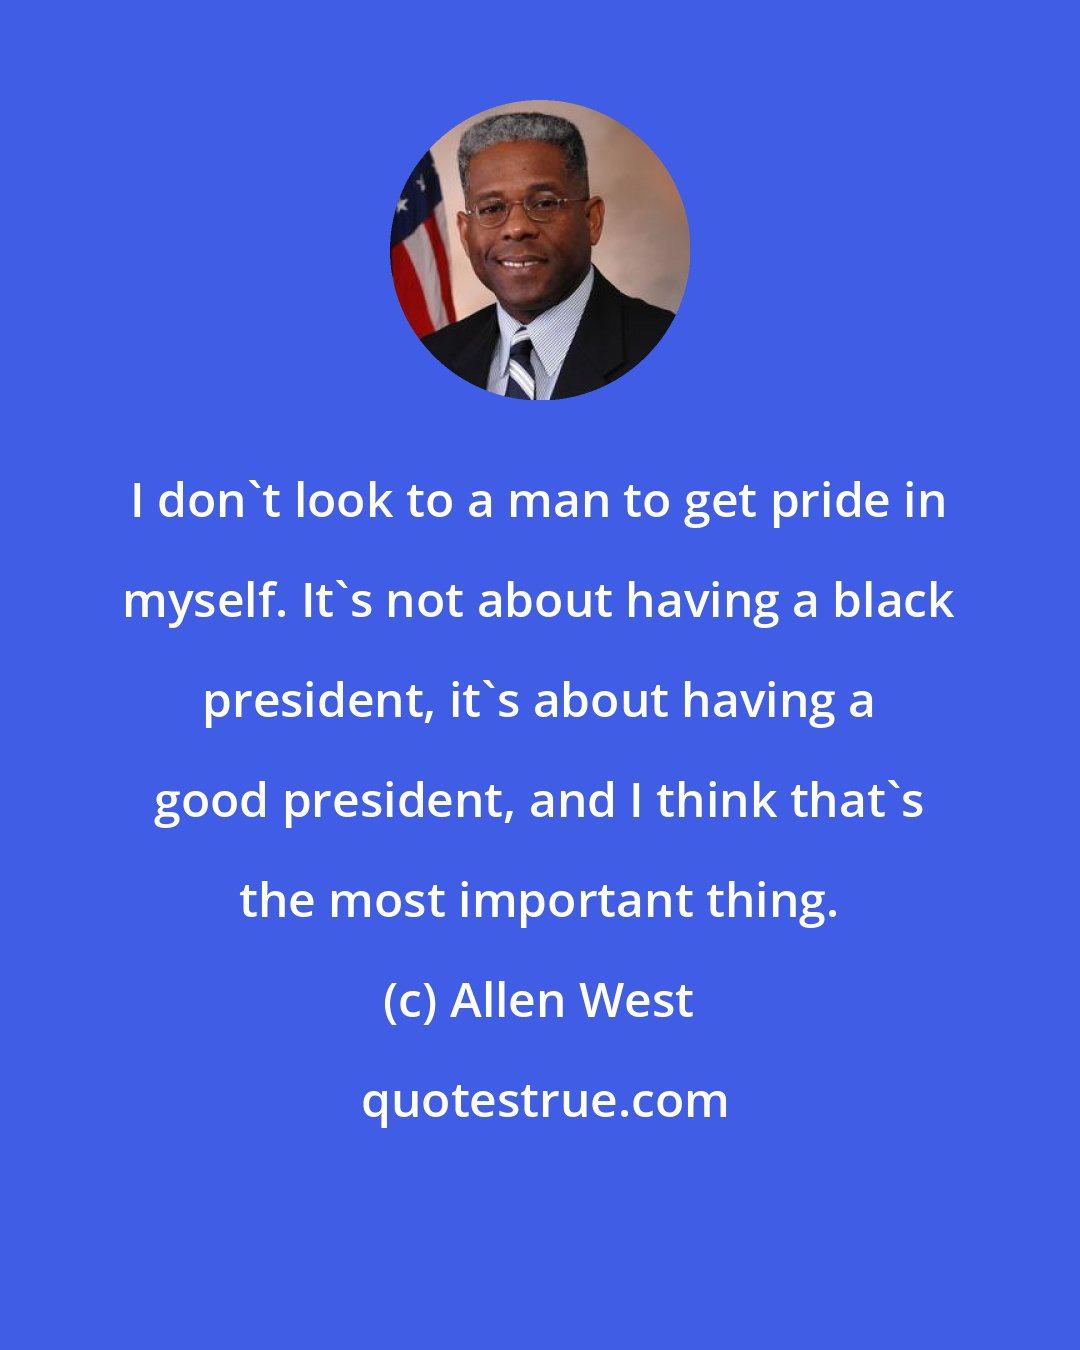 Allen West: I don't look to a man to get pride in myself. It's not about having a black president, it's about having a good president, and I think that's the most important thing.